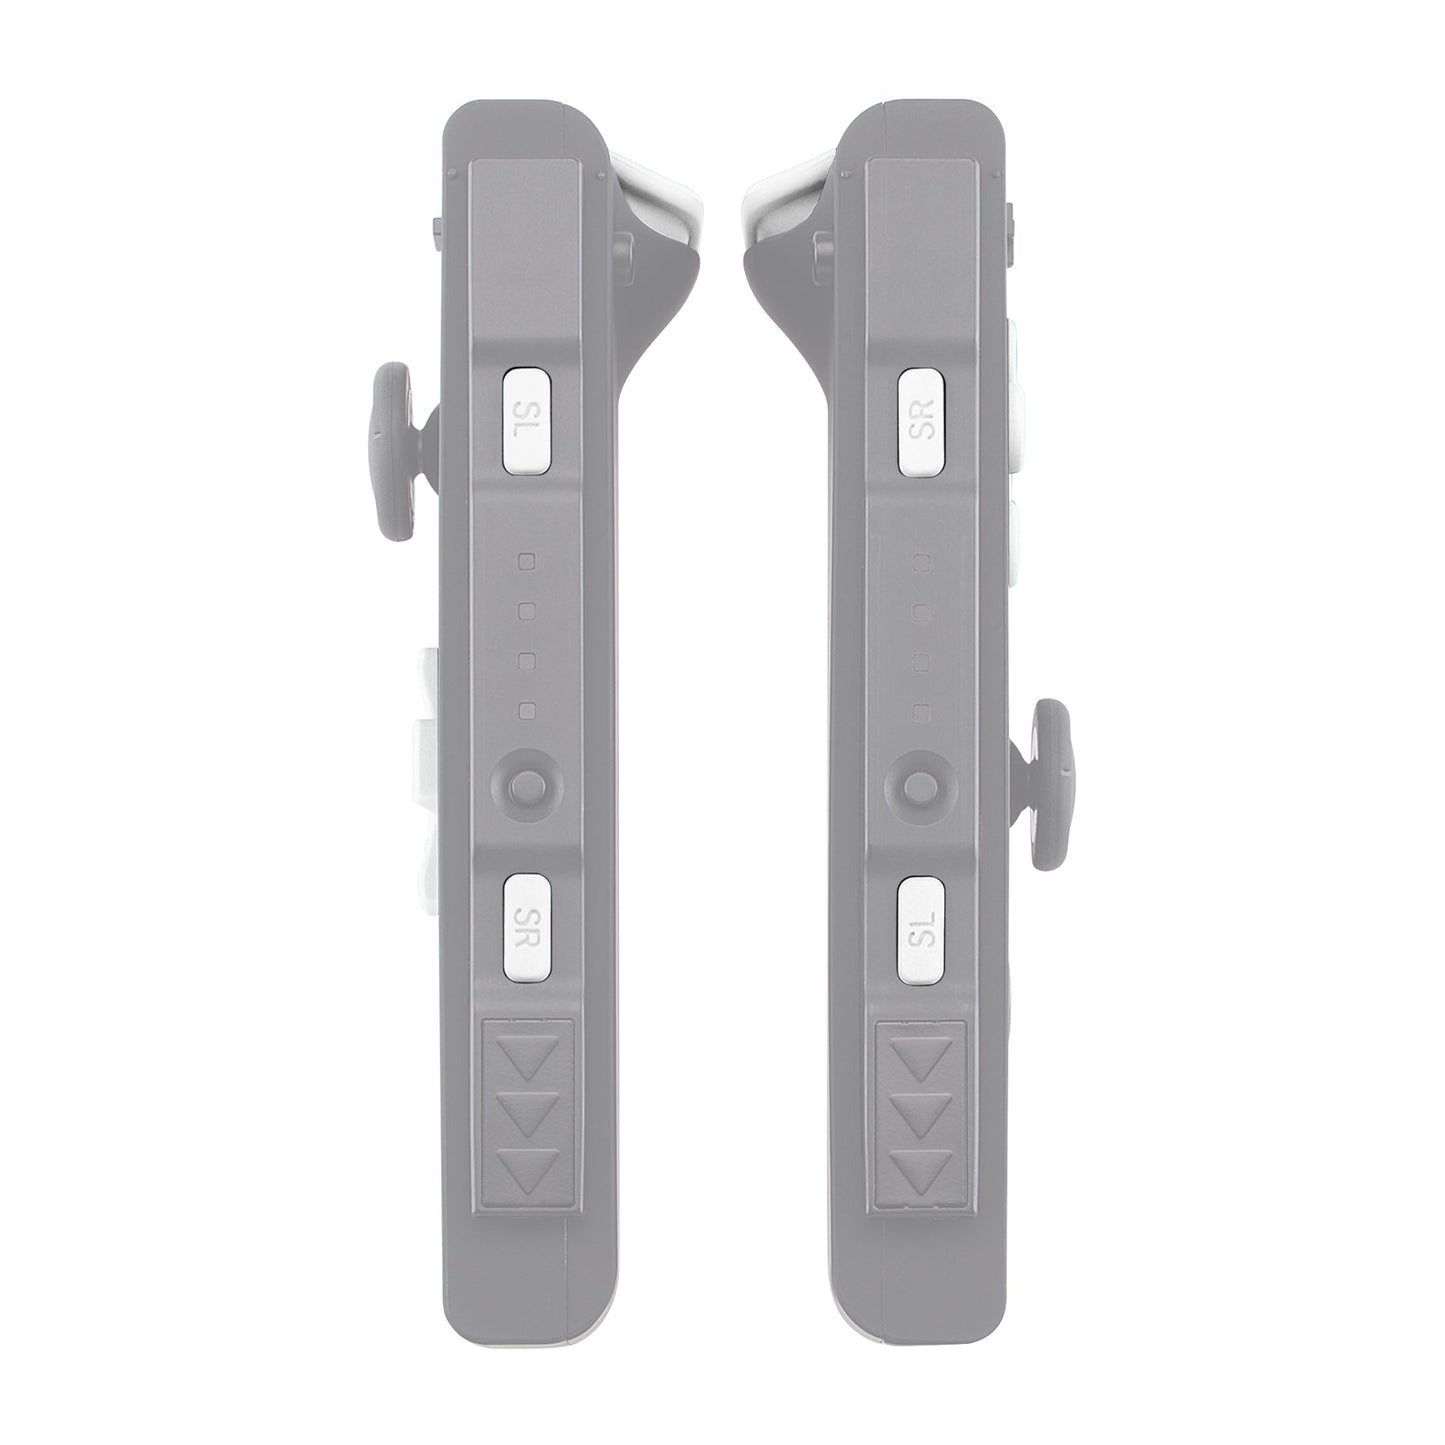 eXtremeRate Retail White D-pad ABXY Keys SR SL L R ZR ZL Trigger Buttons Springs, Replacement Full Set Buttons Fix Kits for NS Switch Joycon & OLED JoyCon (D-pad ONLY Fits for eXtremeRate Joycon D-pad Shell) - BZP303